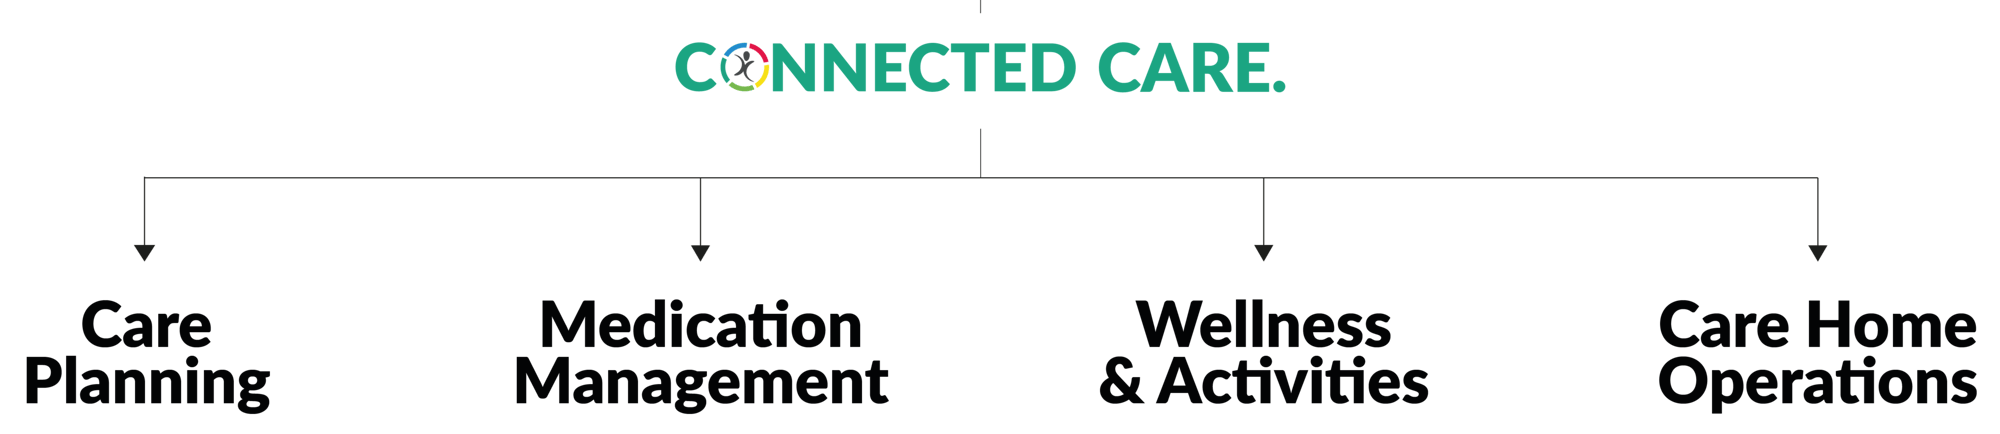 Connected Care 1-2